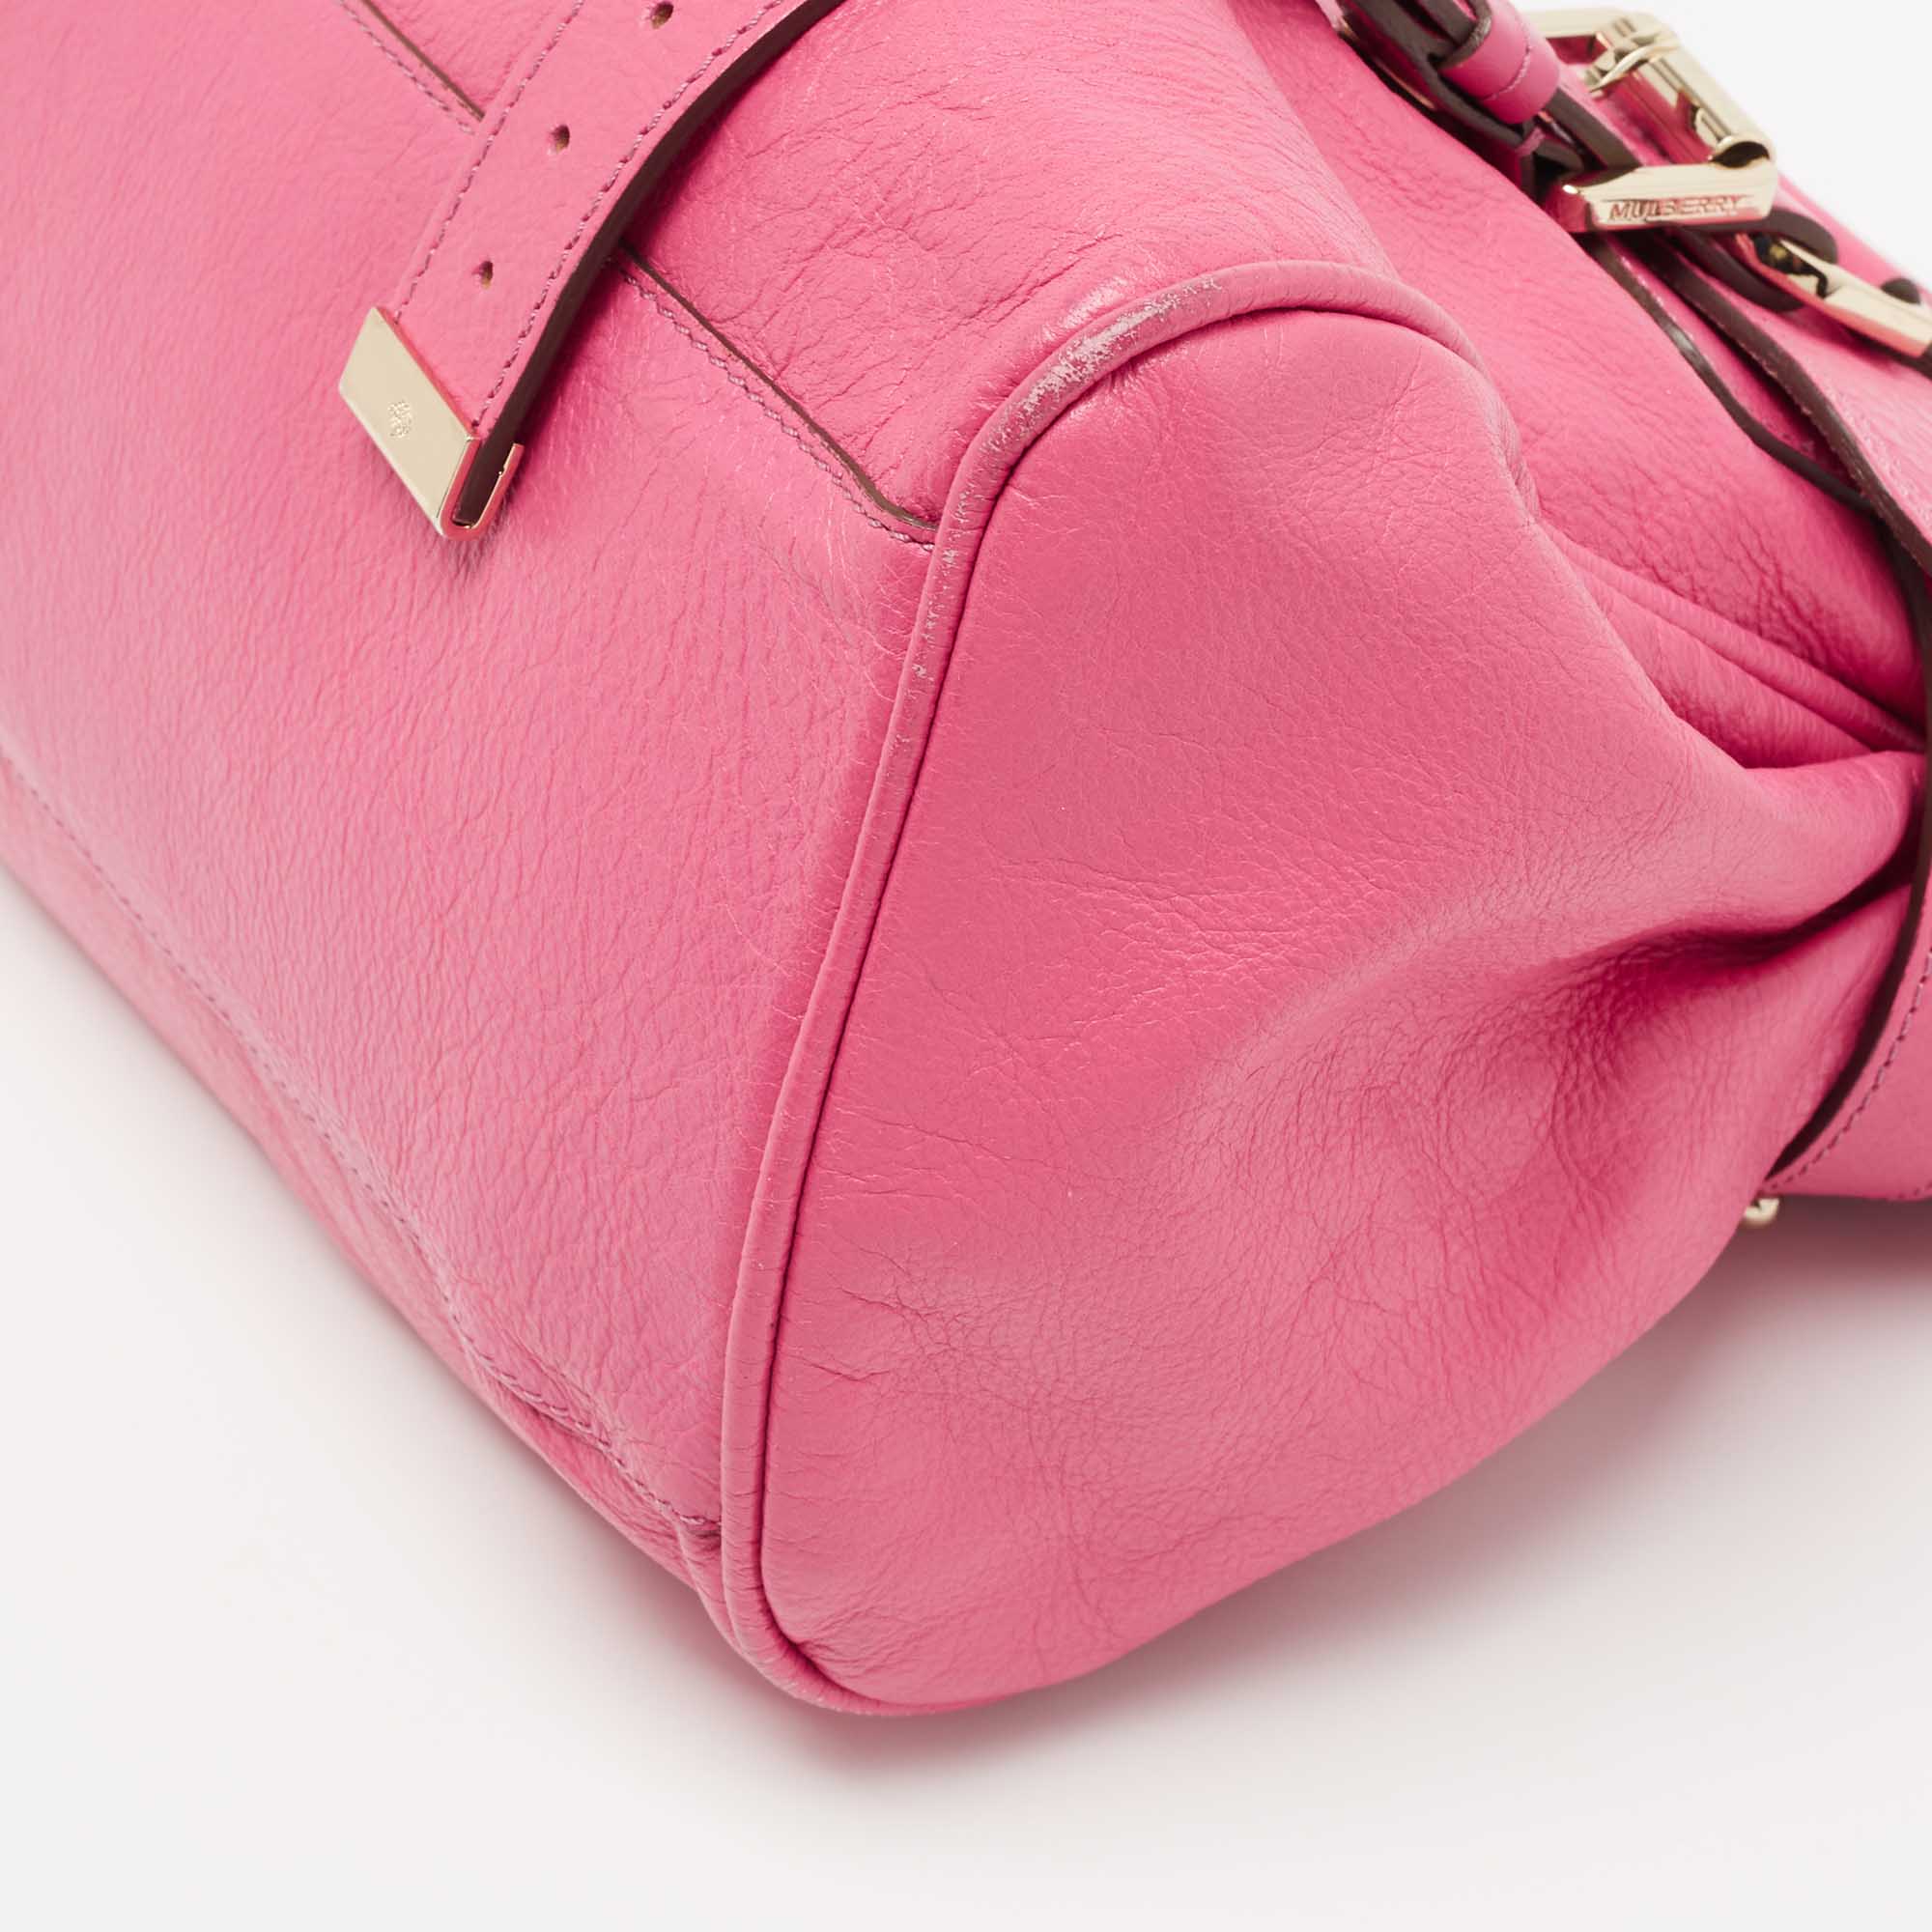 Mulberry Alexa Leather Bag in peach-pink, HealthdesignShops